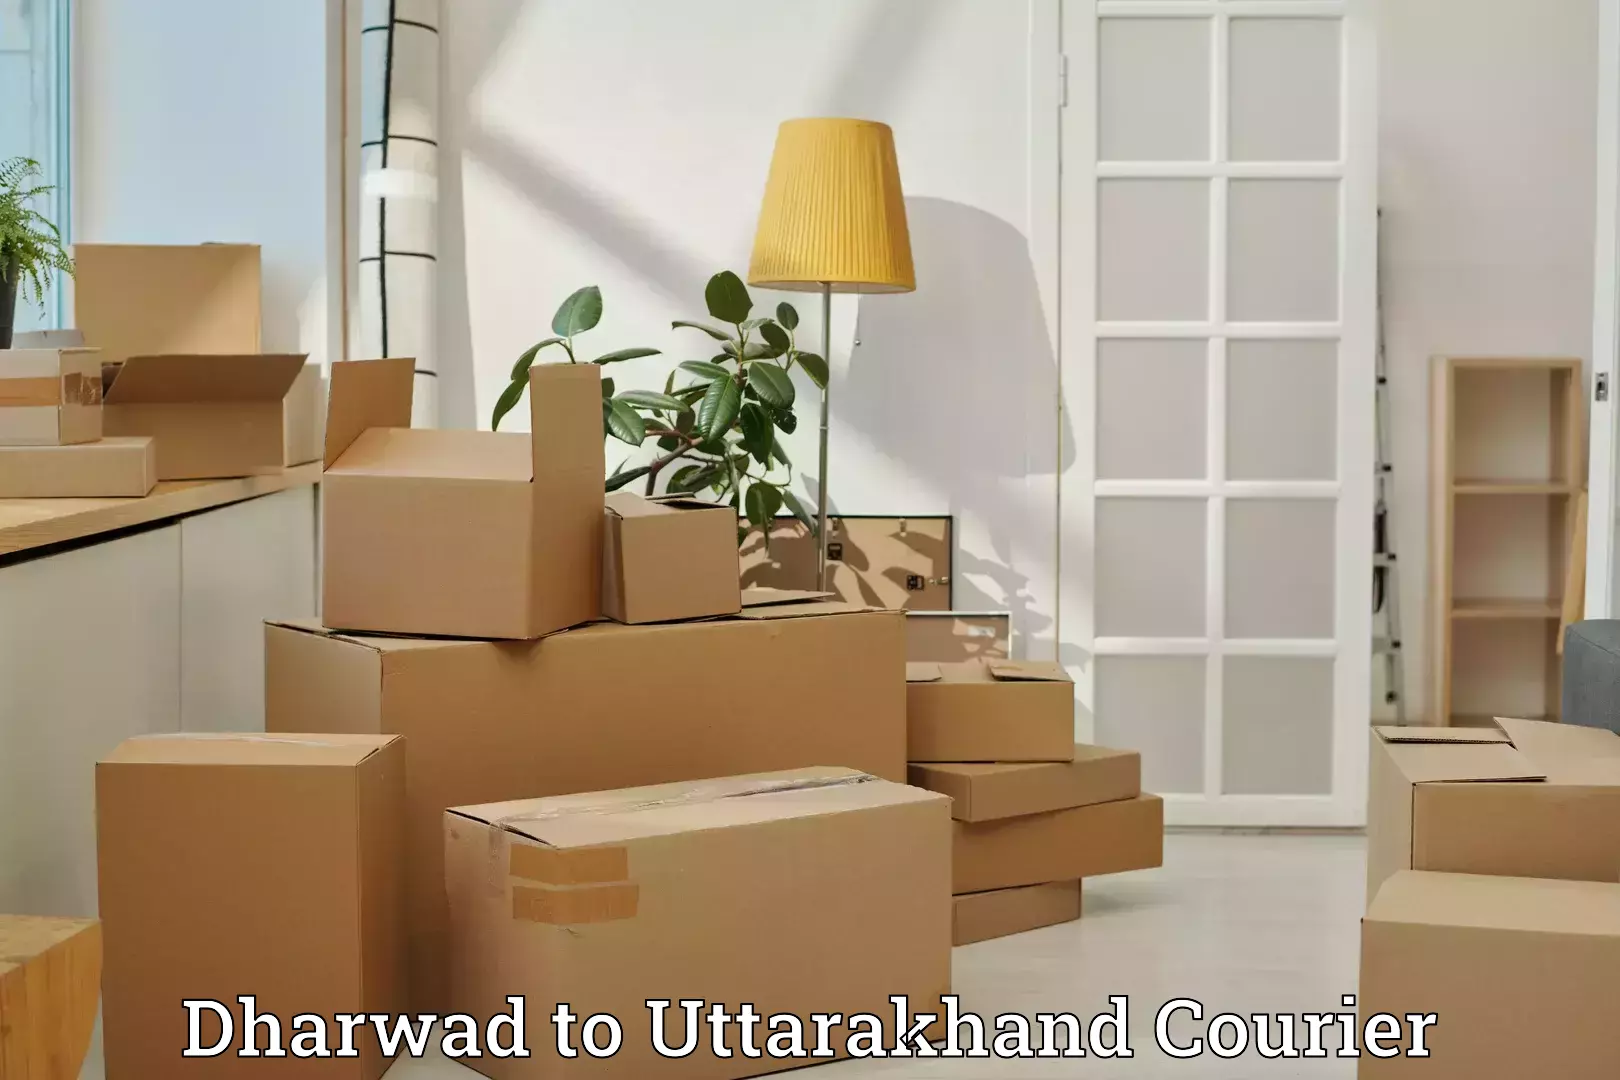 Luggage shipment specialists Dharwad to Herbertpur